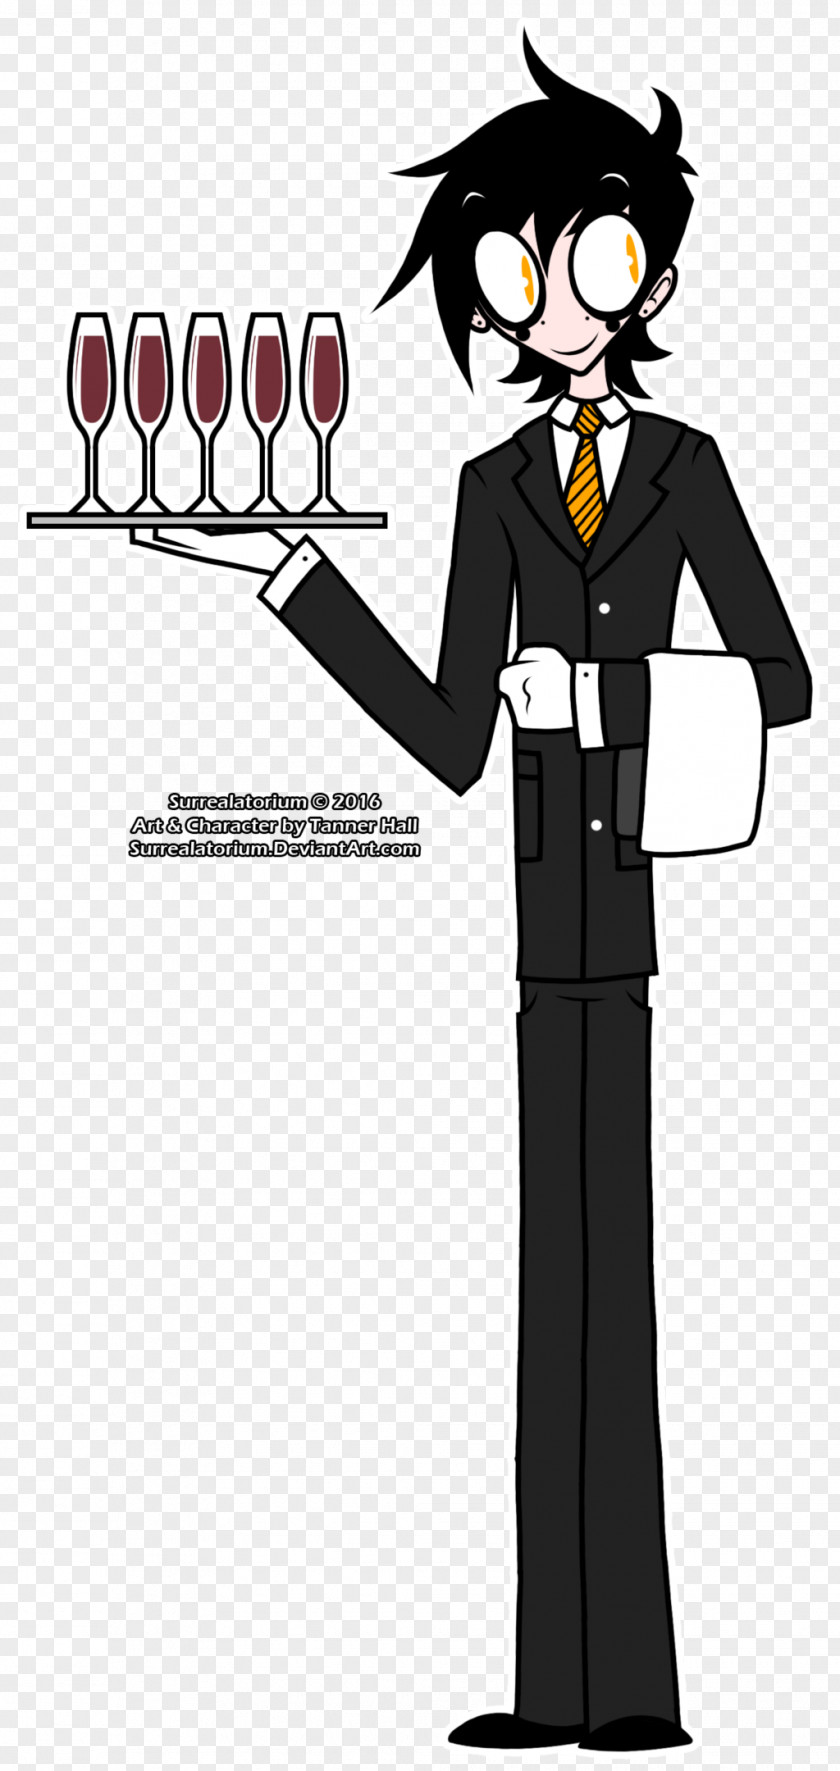 Formal Suits Character Uniform Profession Fiction Animated Cartoon PNG